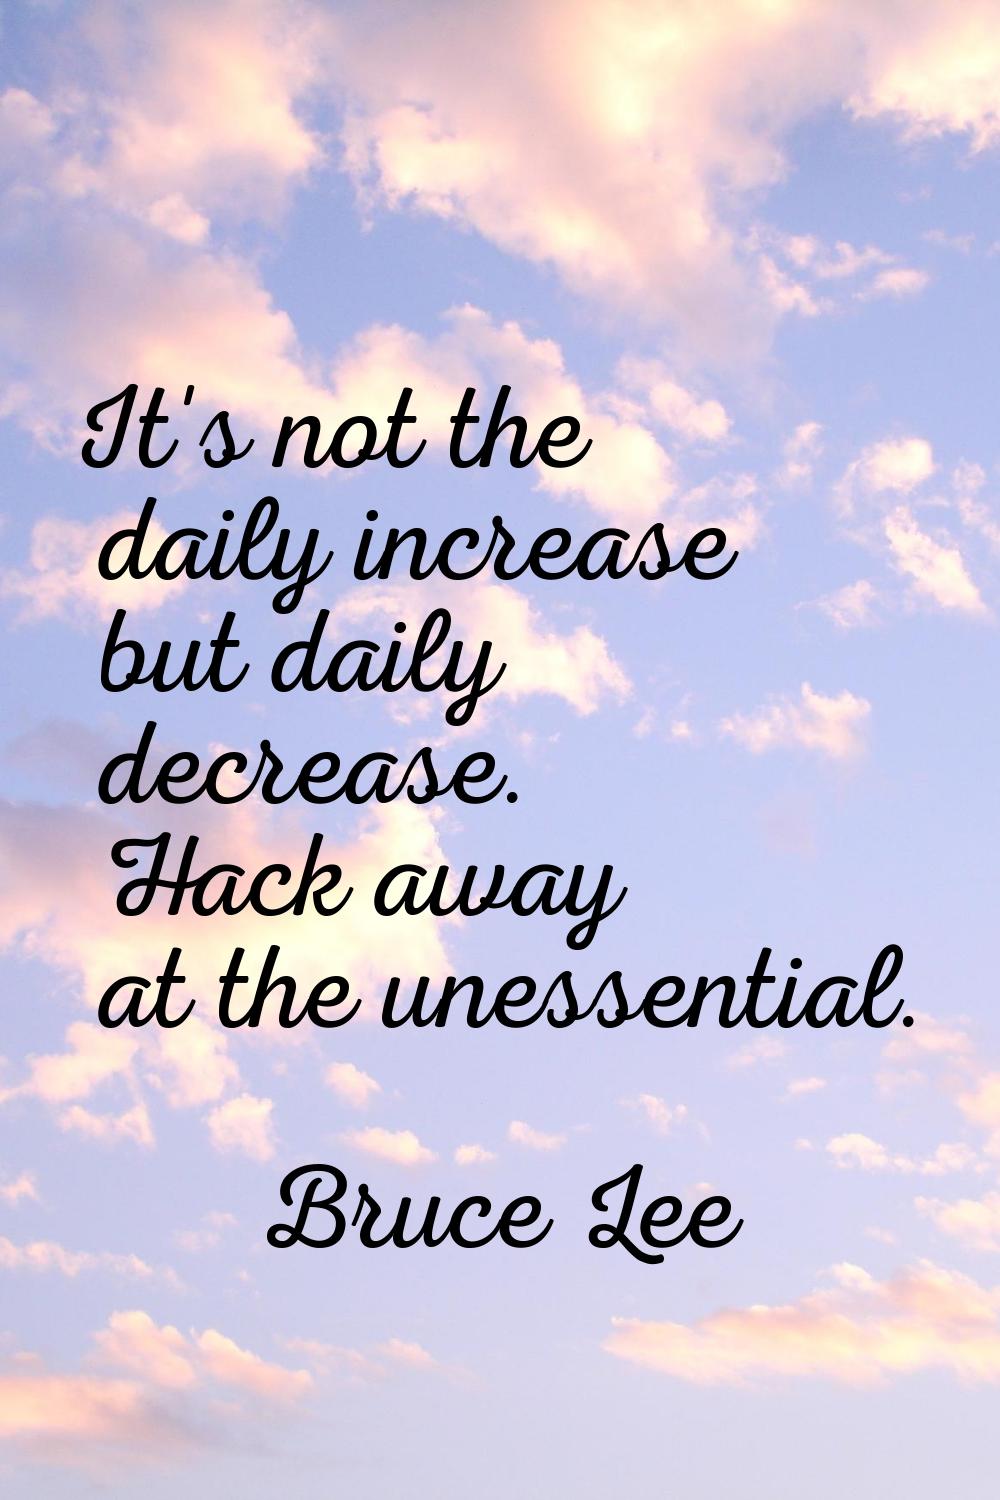 It's not the daily increase but daily decrease. Hack away at the unessential.